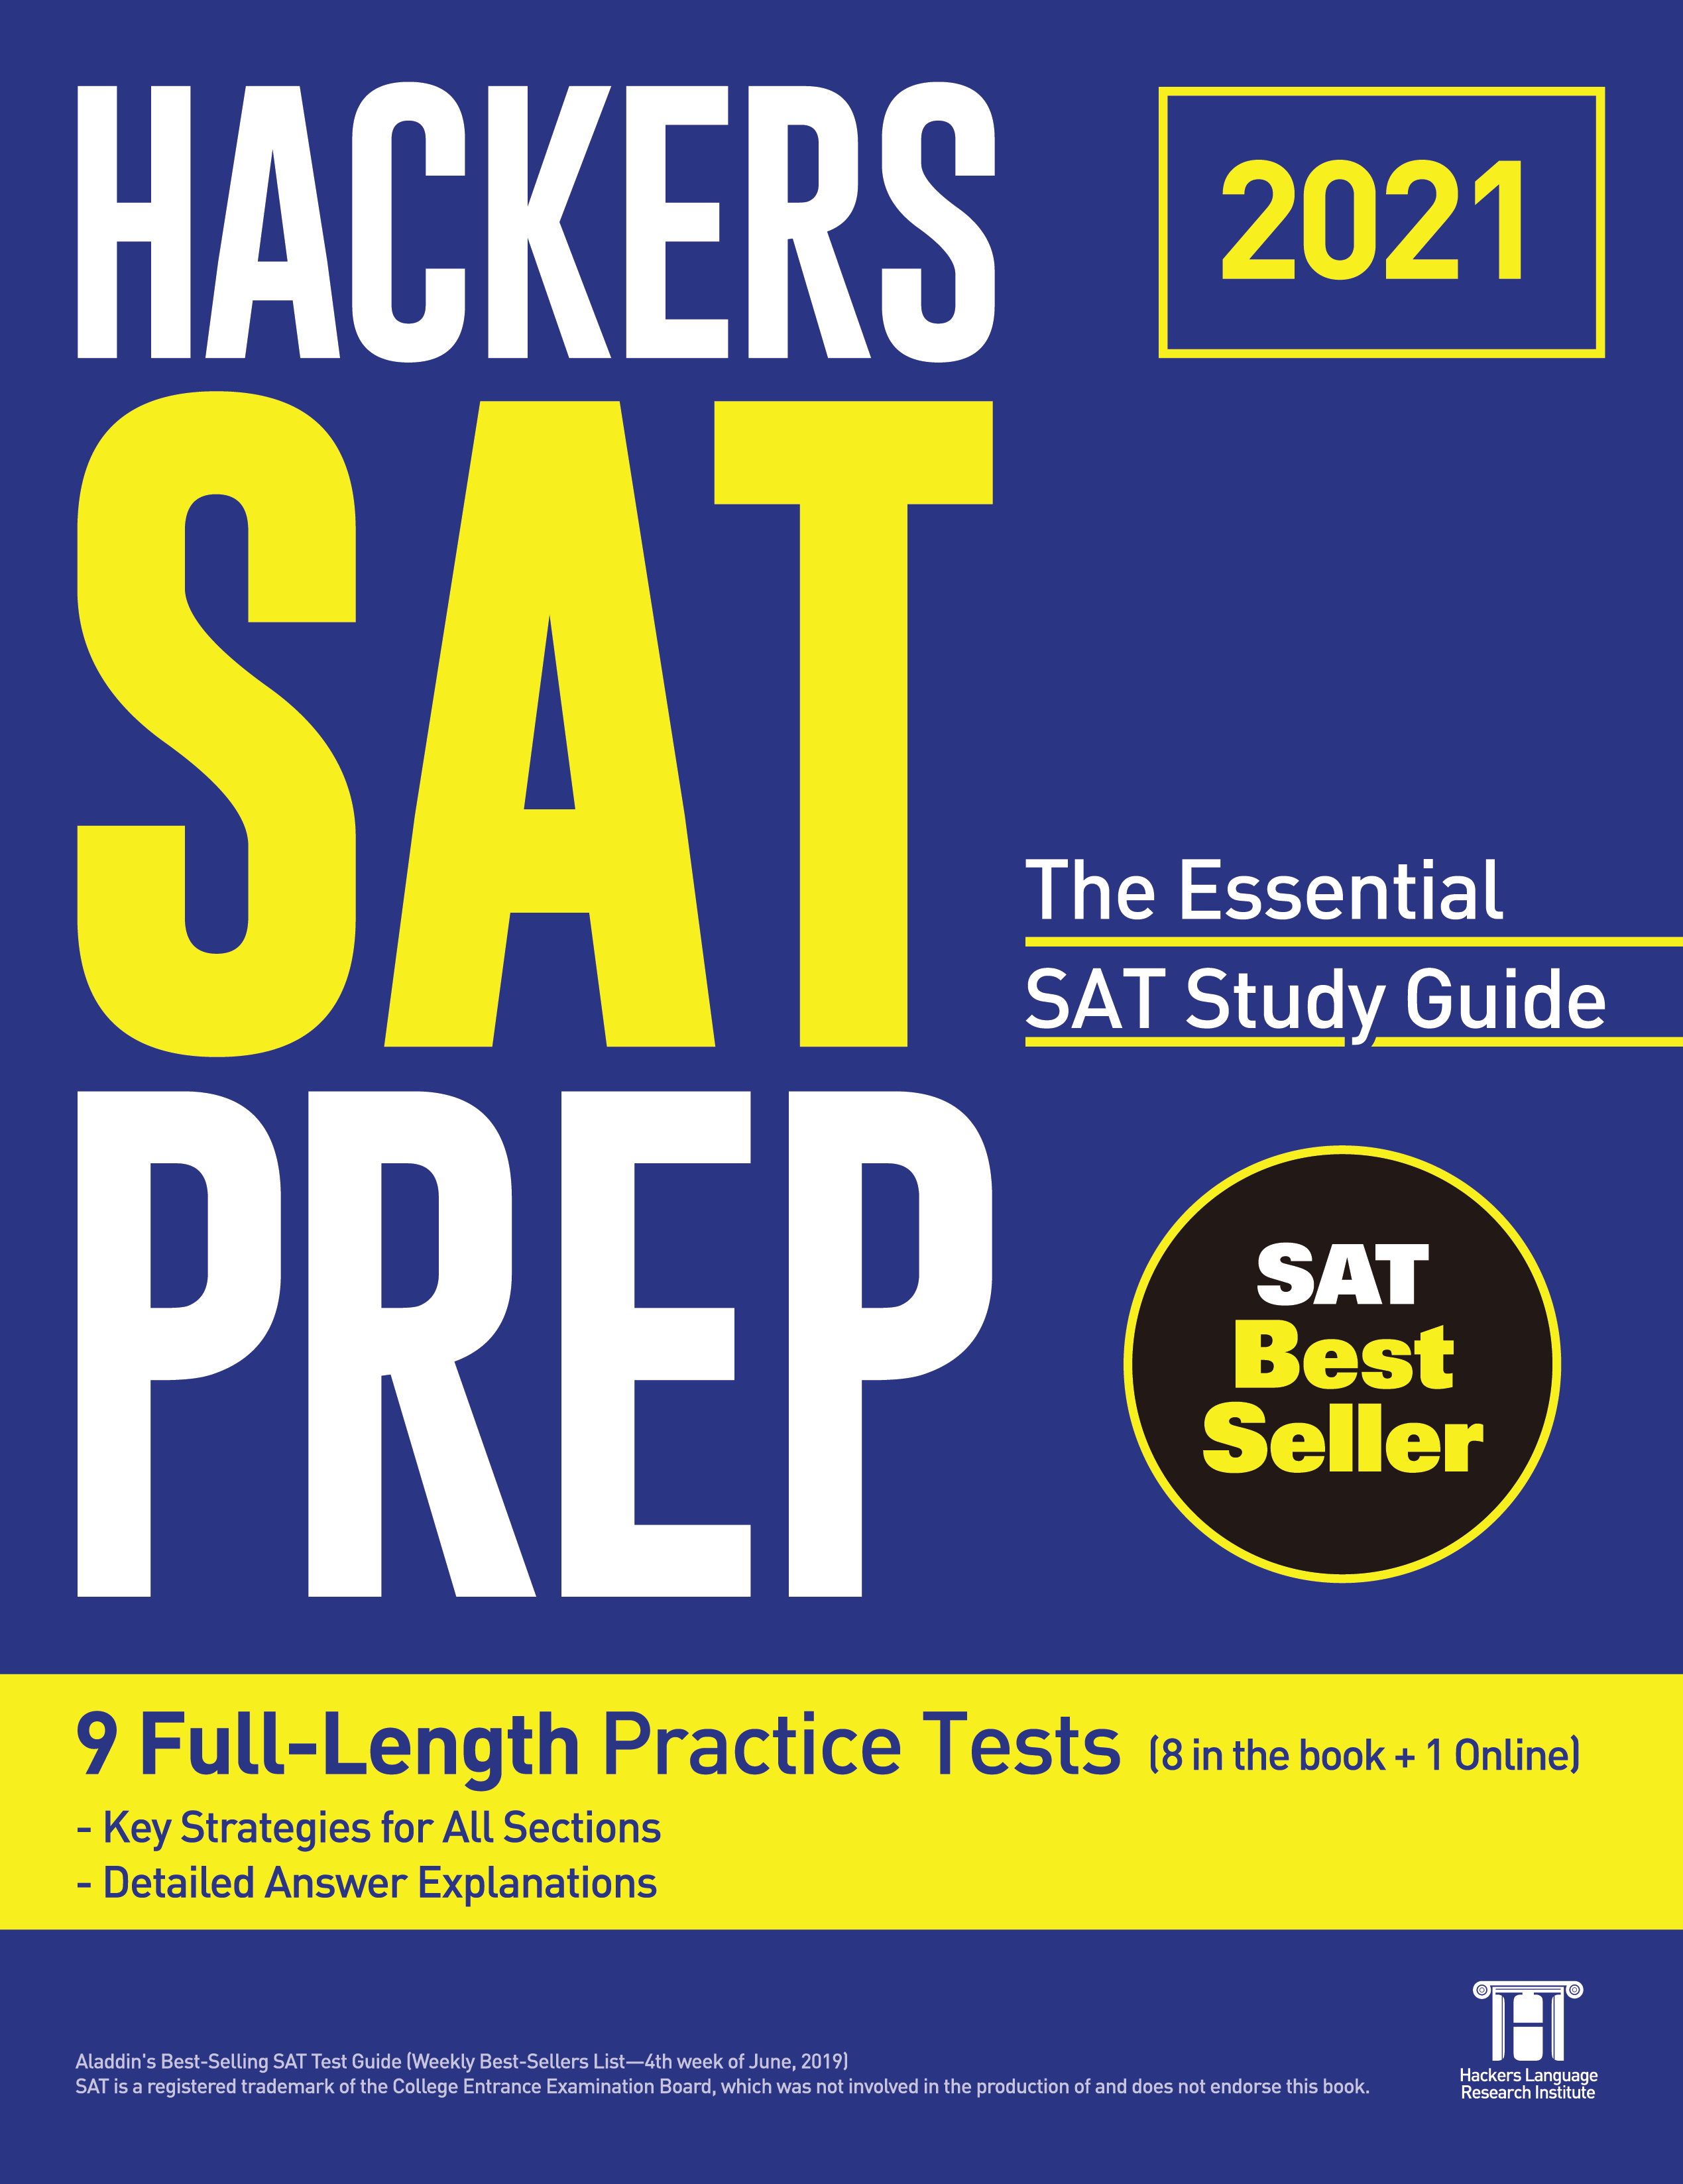 HACKERS SAT PREP(The Essential SAT Study Guide)